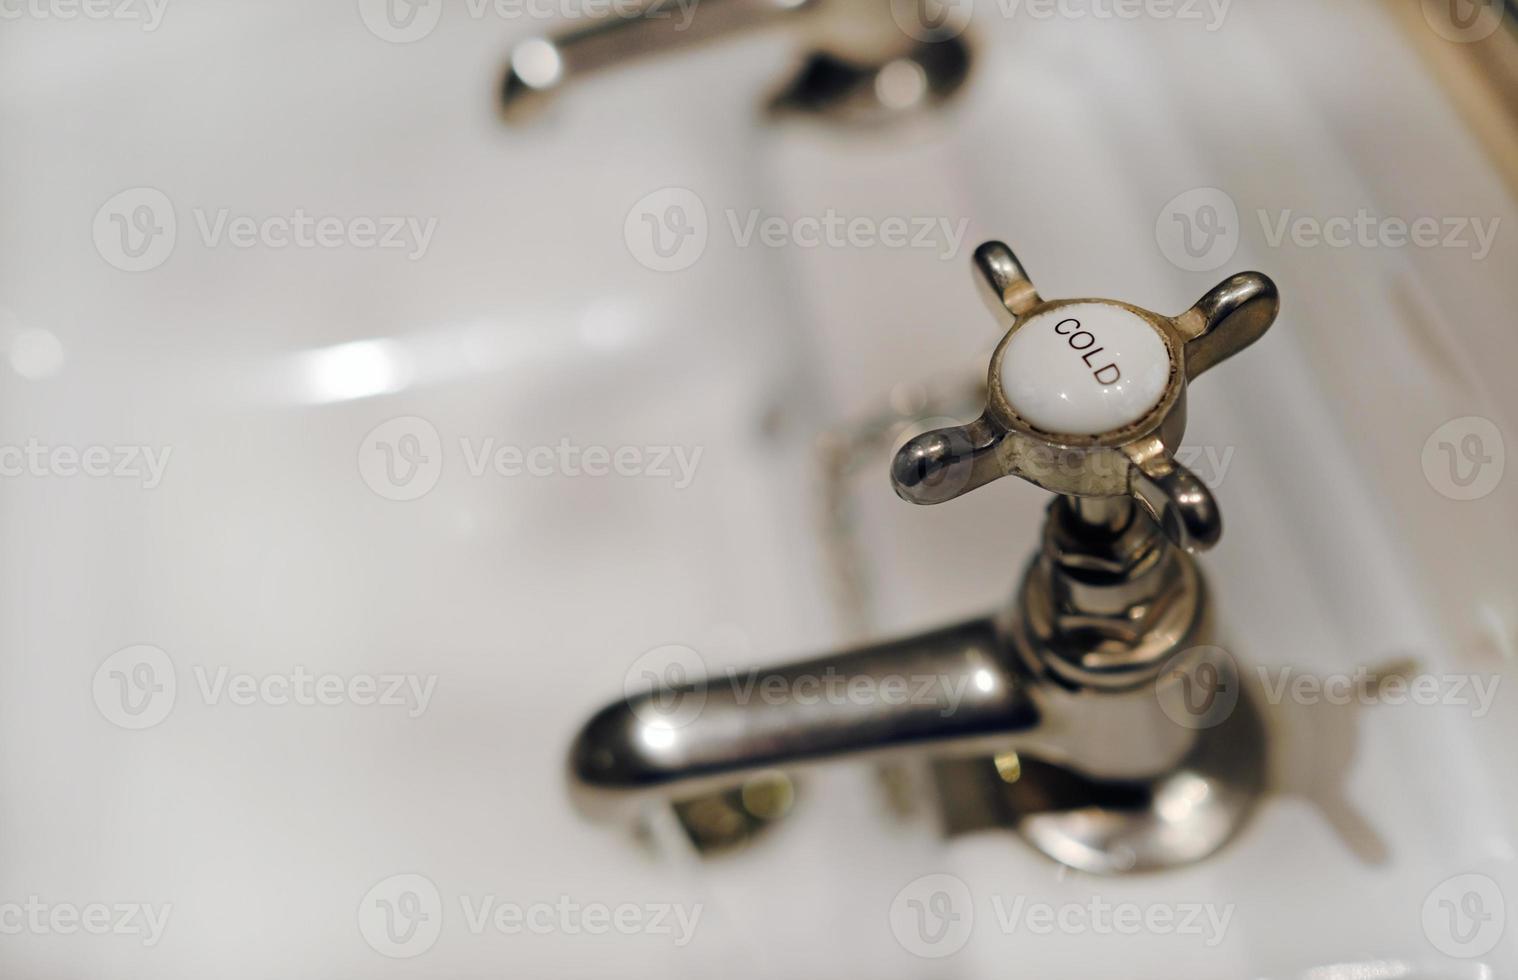 Old fashioned faucet and sink photo